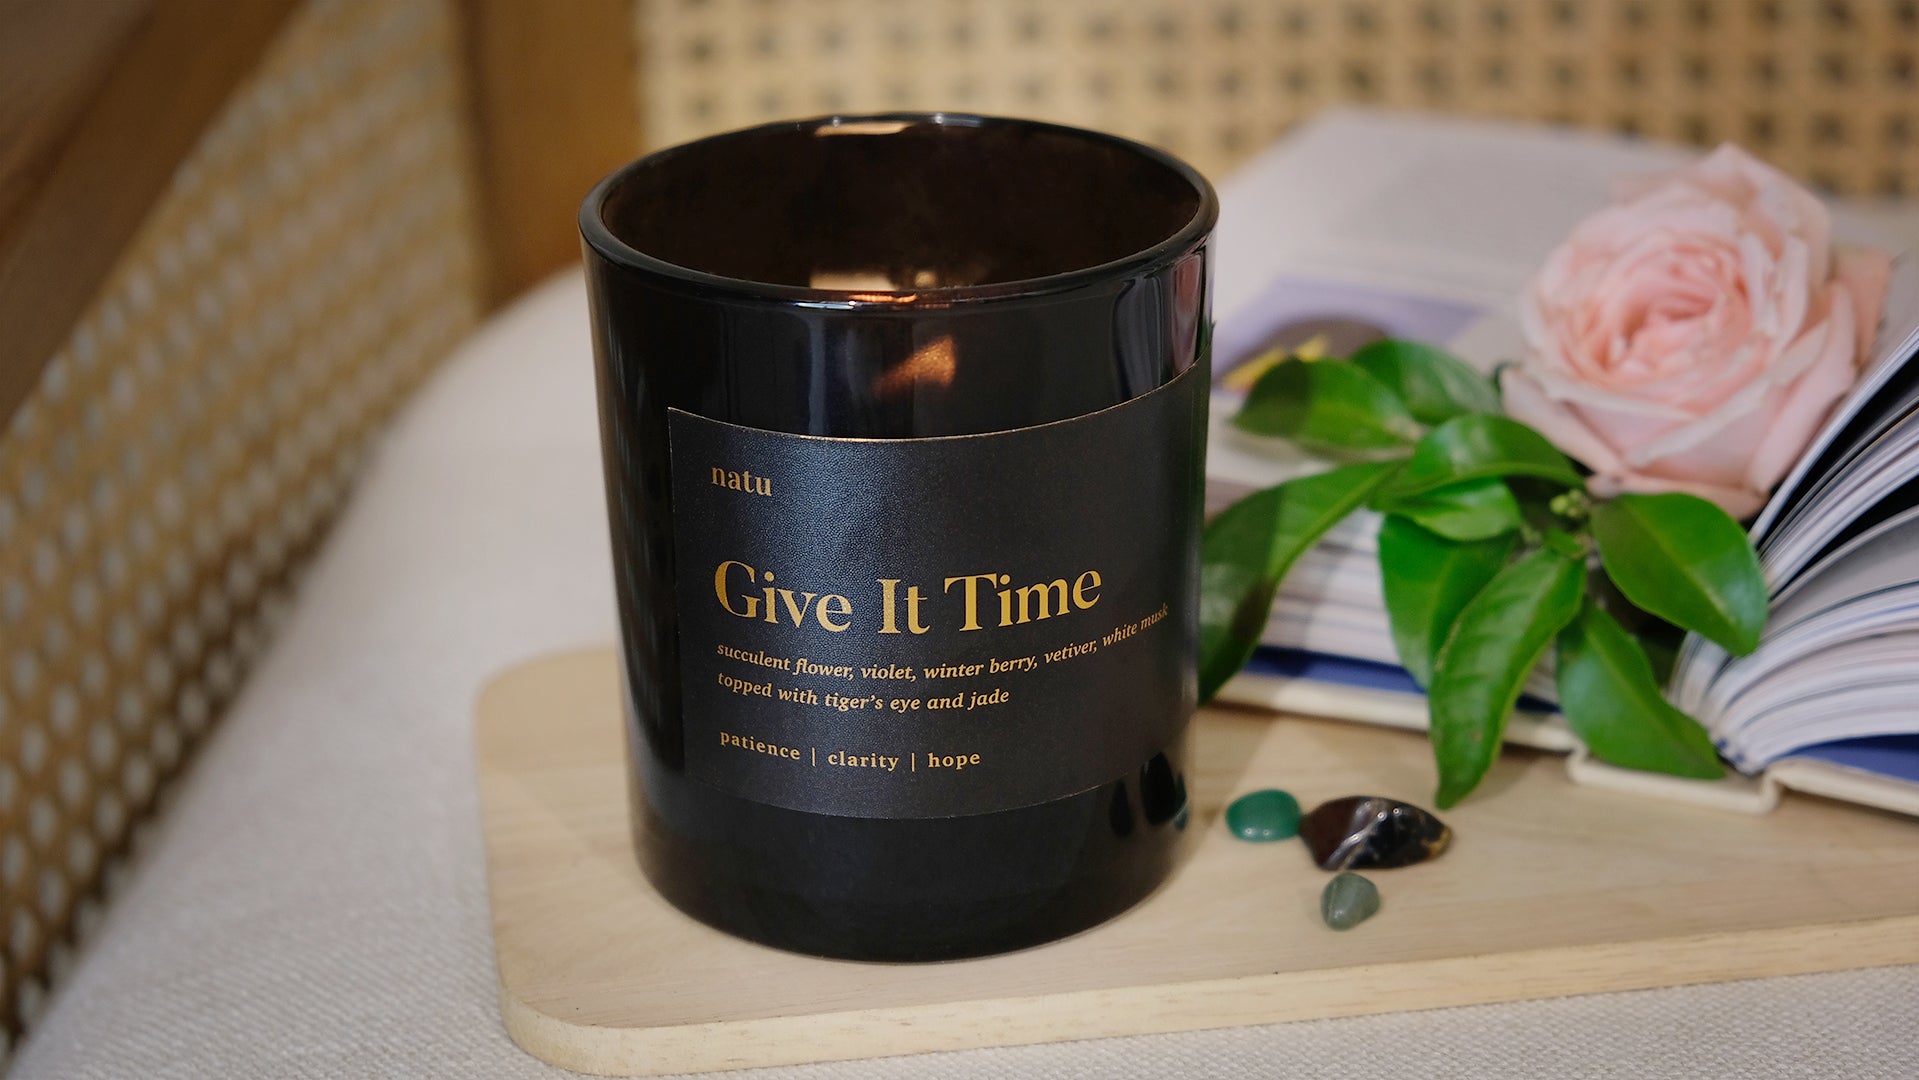 Product Inspiration: Give It Time